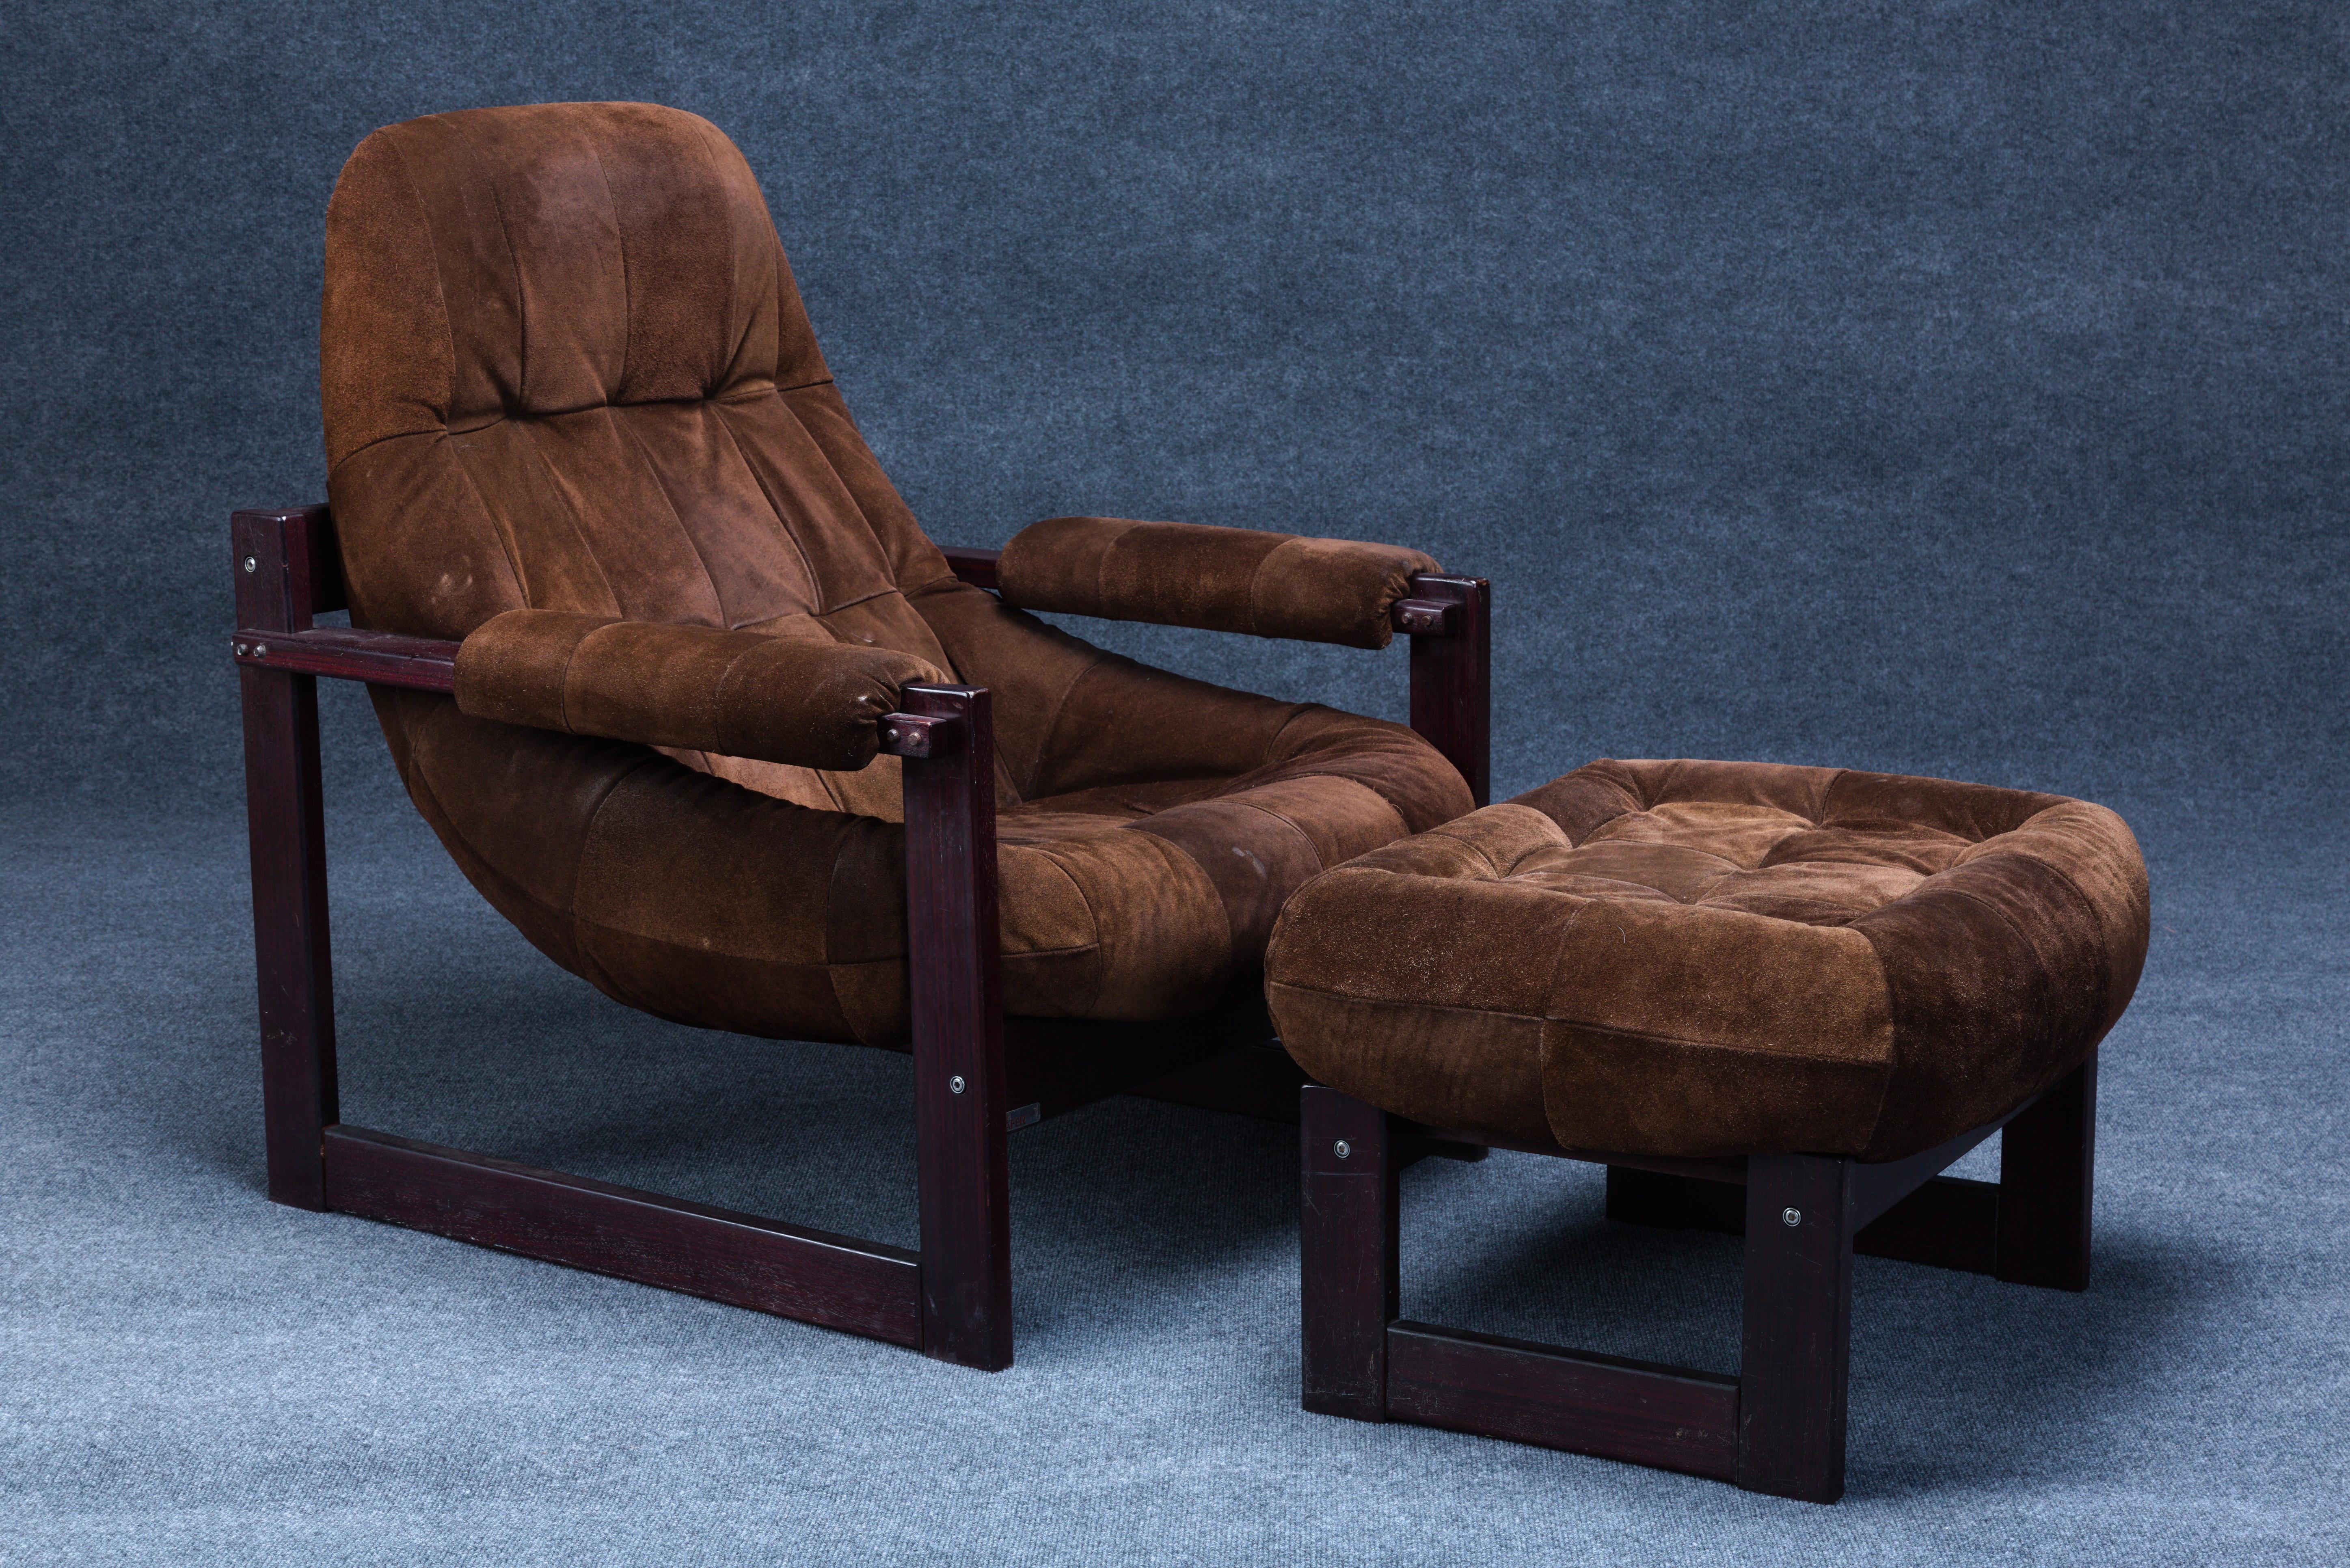 Brazilian Mid-Century Modern Armchair/Ottoman by Percival Lafer in Suede Leather For Sale 8